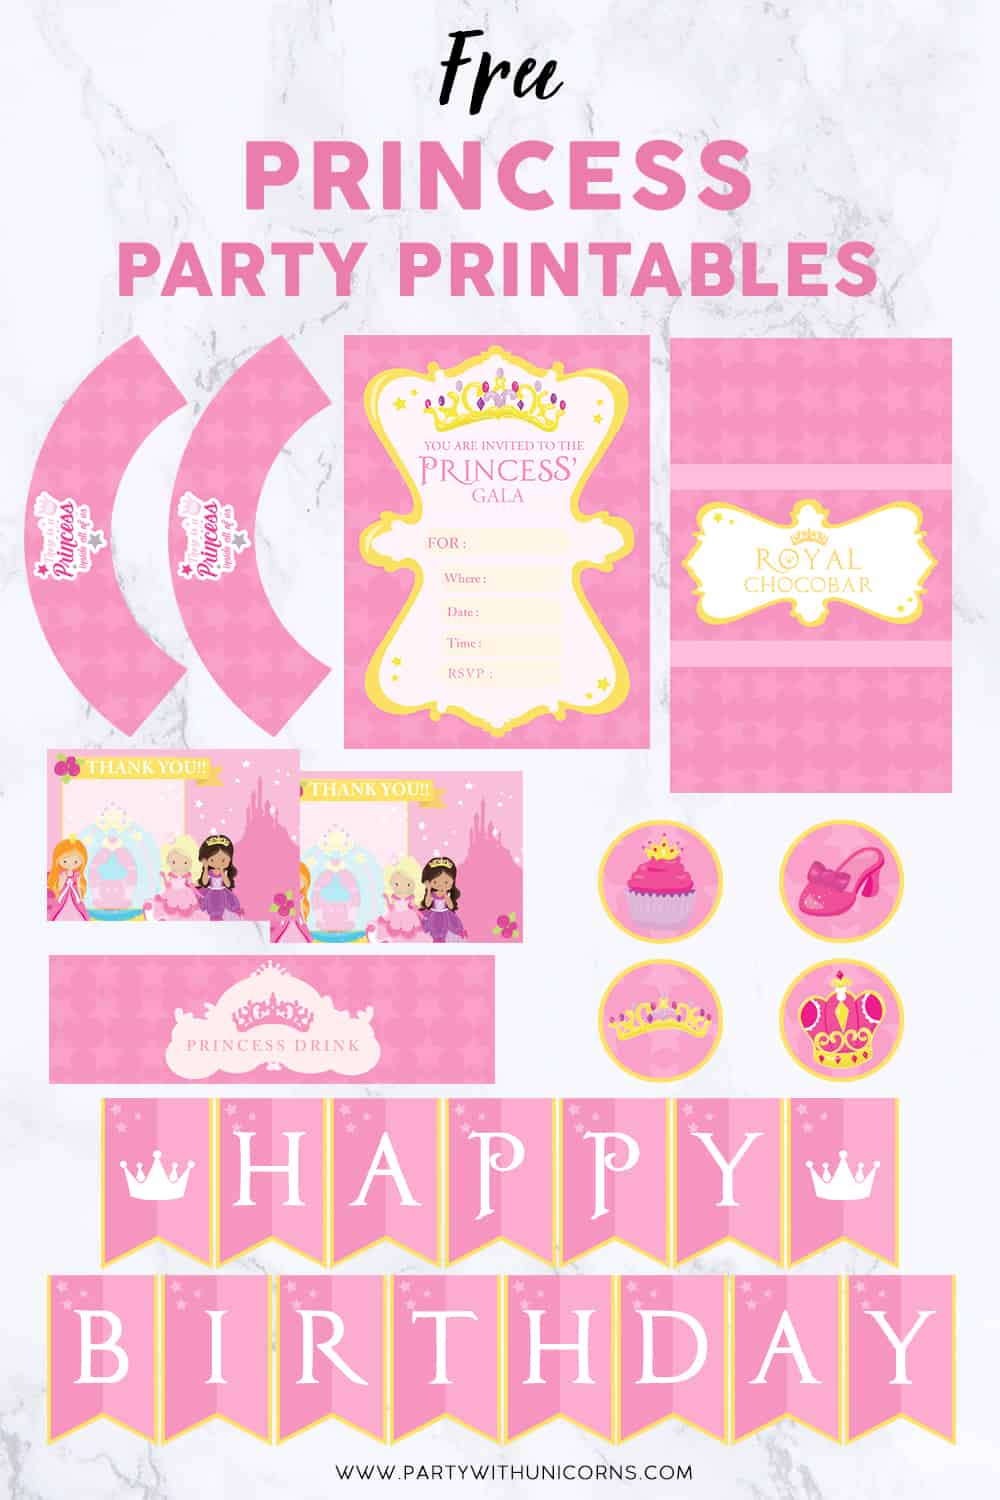 free-princess-party-printables-party-with-unicorns